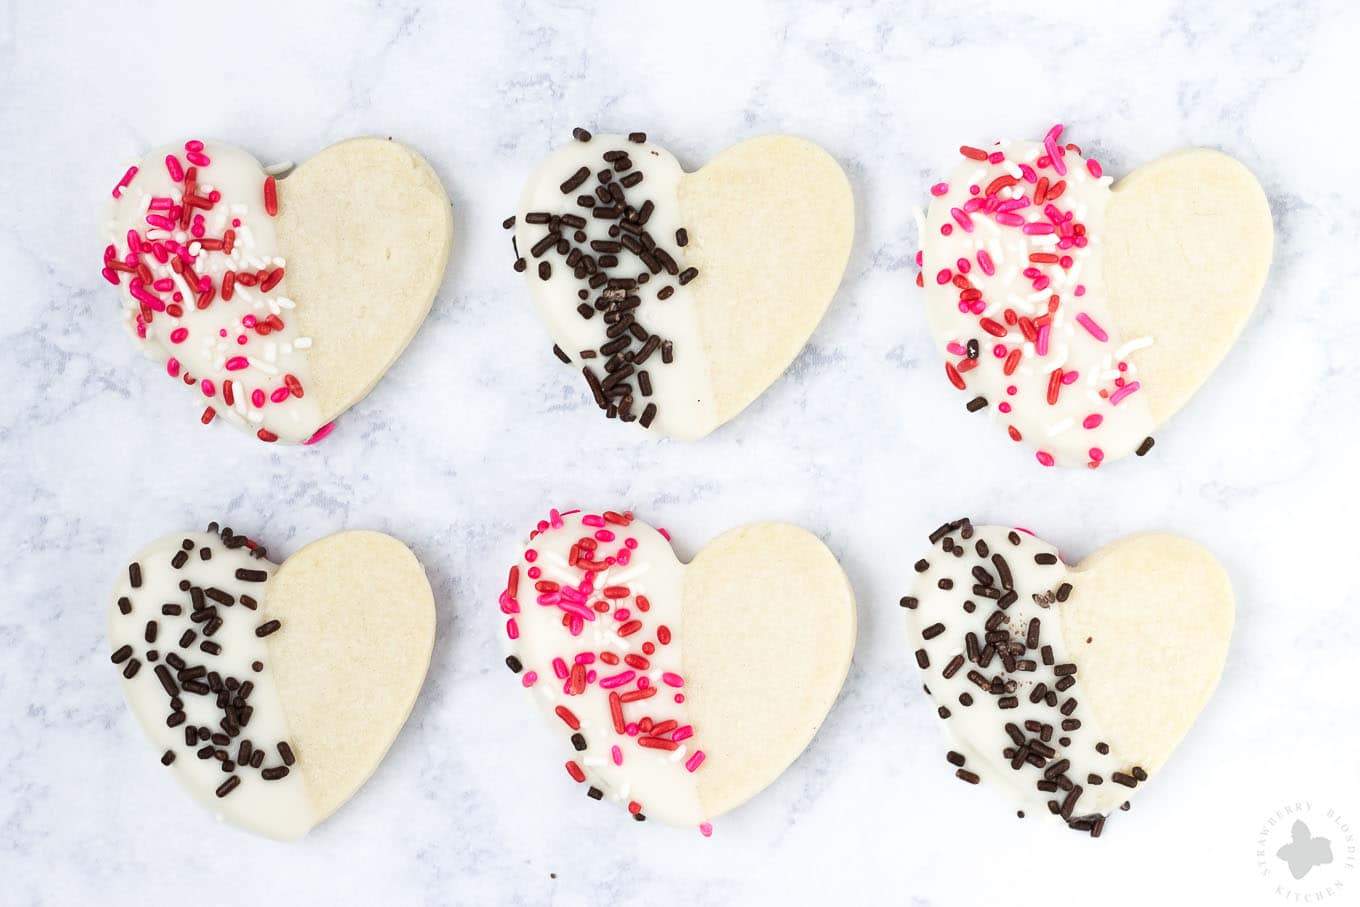 Surprise and delight your Valentine this season with these White Chocolate Cranberry Shortbread Heart Cookies. Nothing says I love you more than fresh home baked cookies shaped like hearts, dipped in white chocolate and covered in sprinkles!